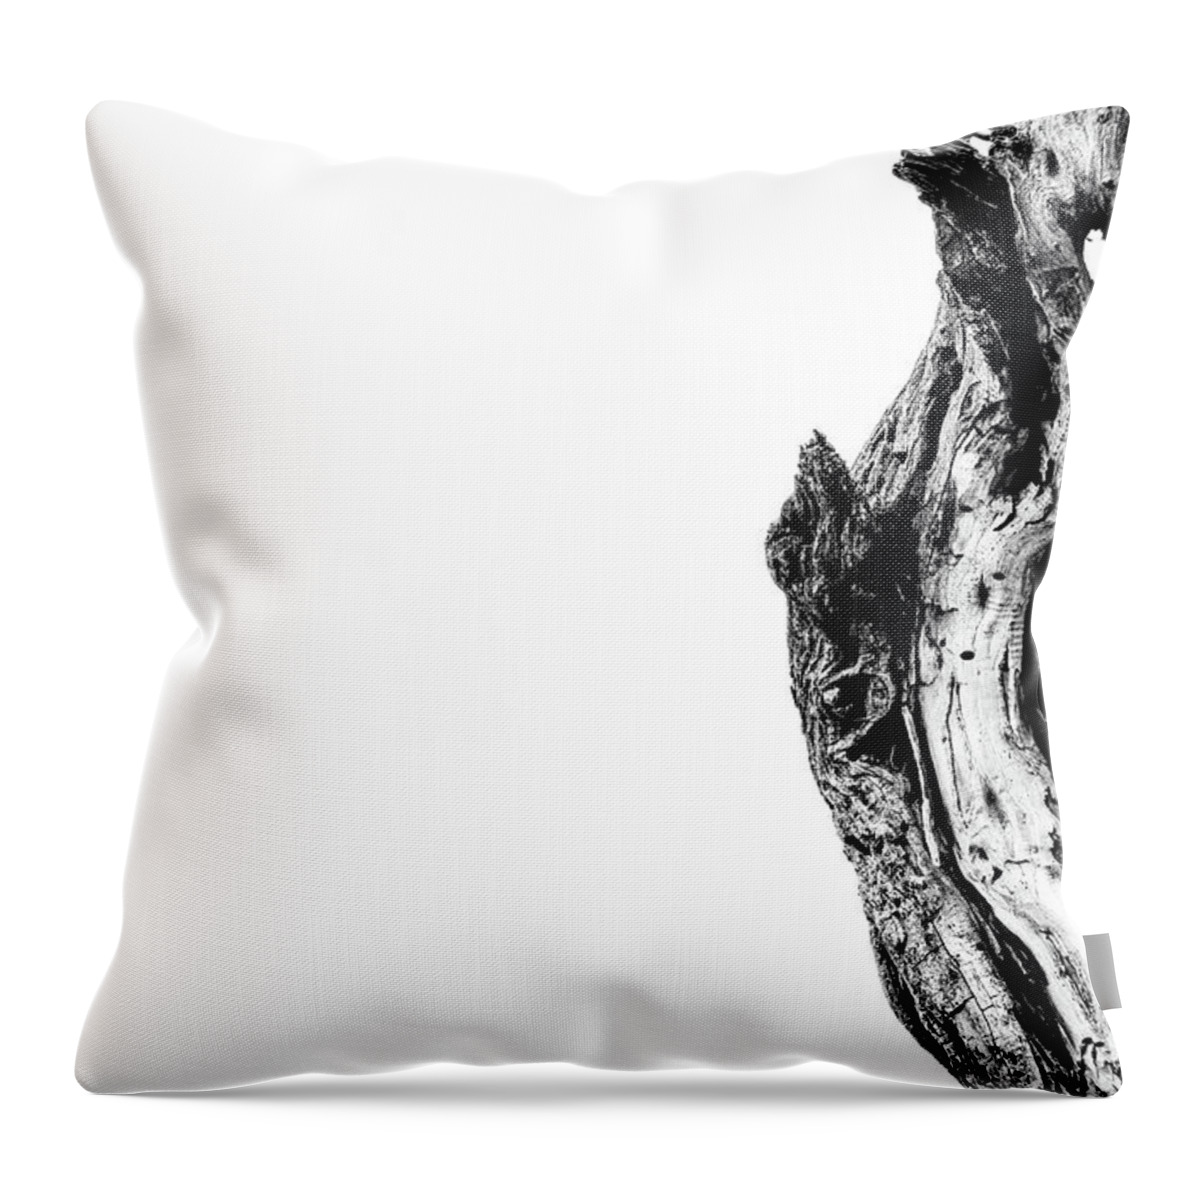 Black And White Throw Pillow featuring the photograph Reaching Up by Melisa Elliott